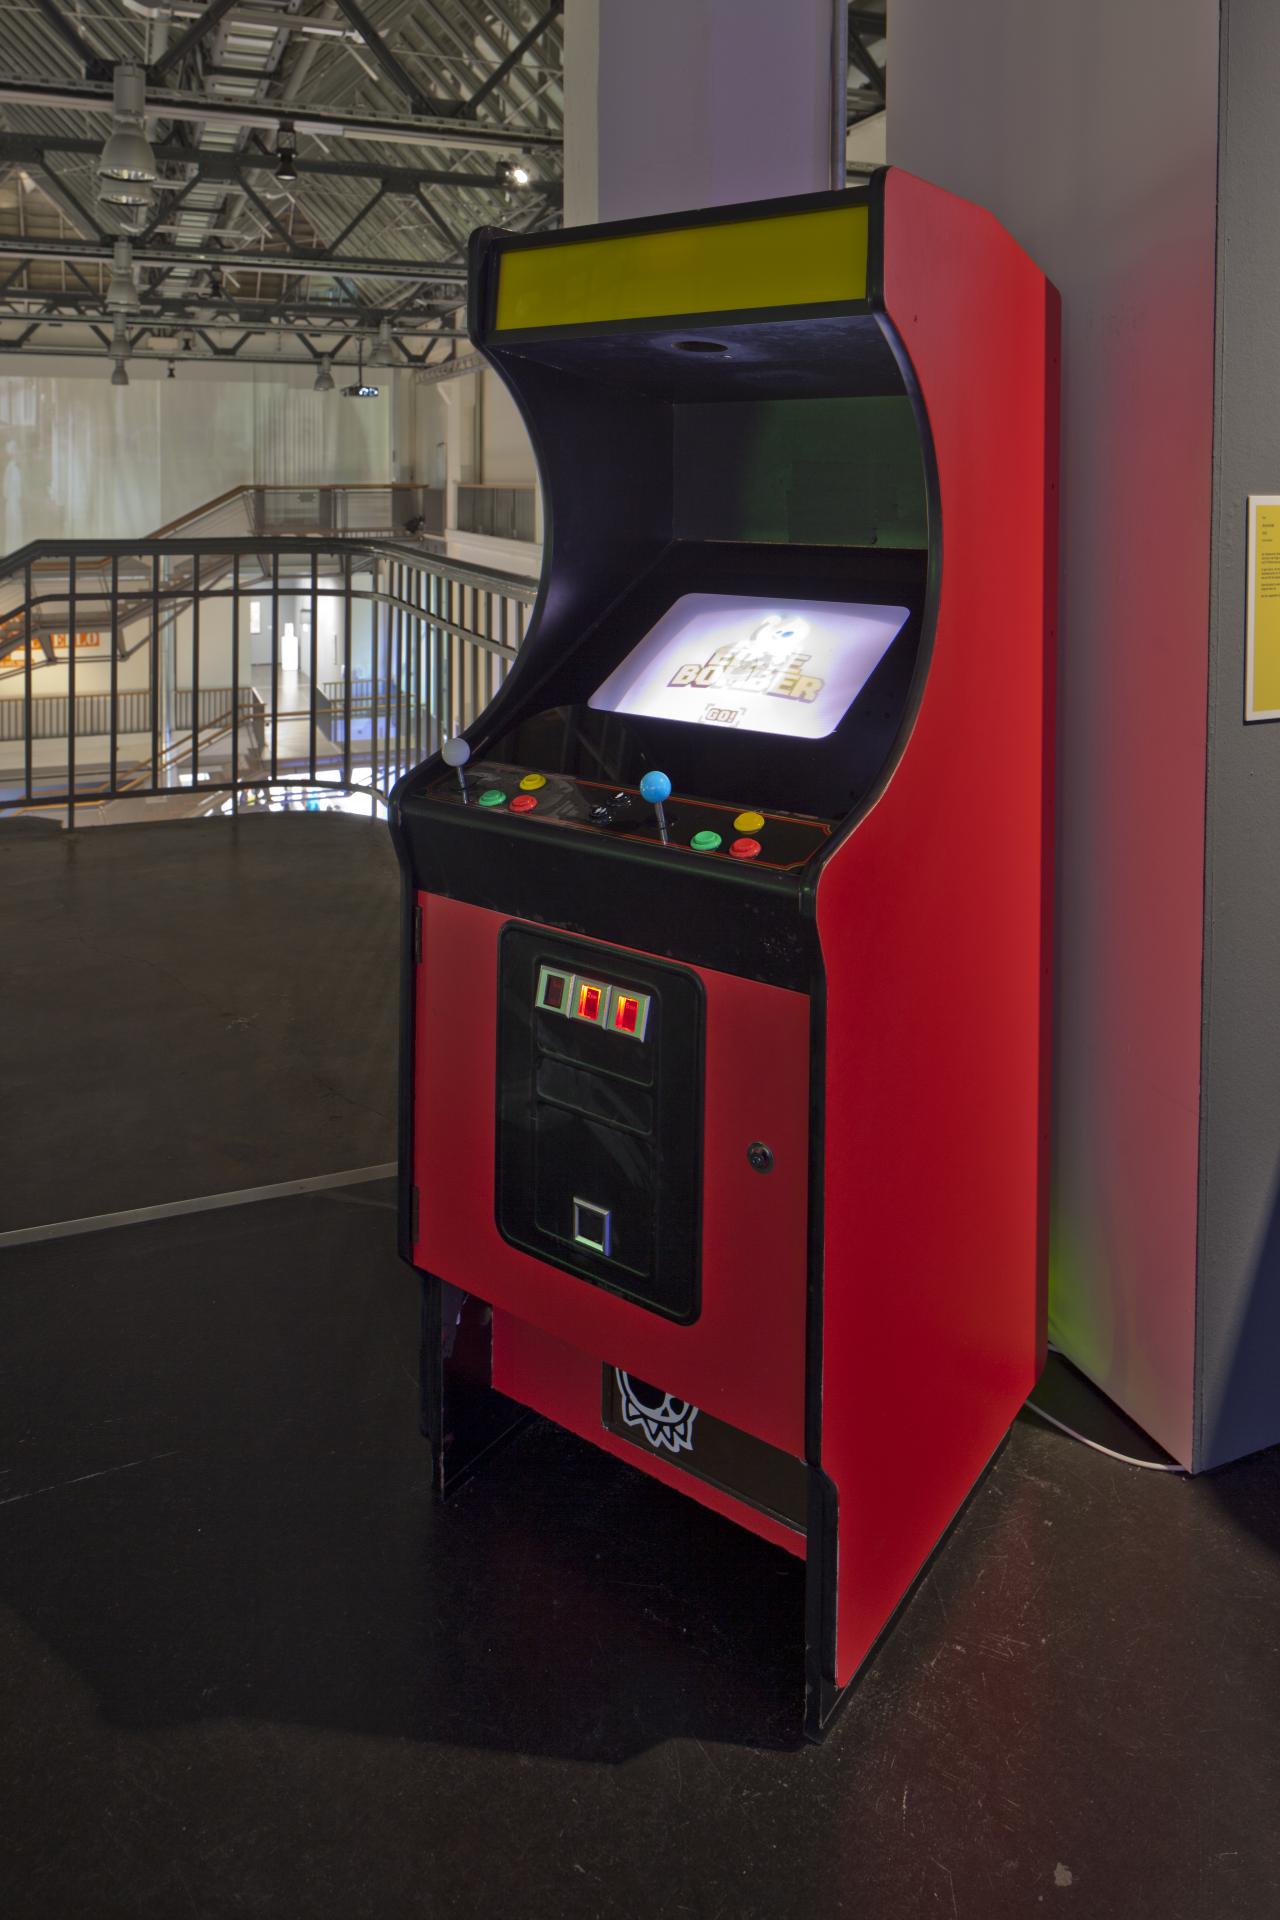 A gaming machine which shows »EdgeBomber« on the display